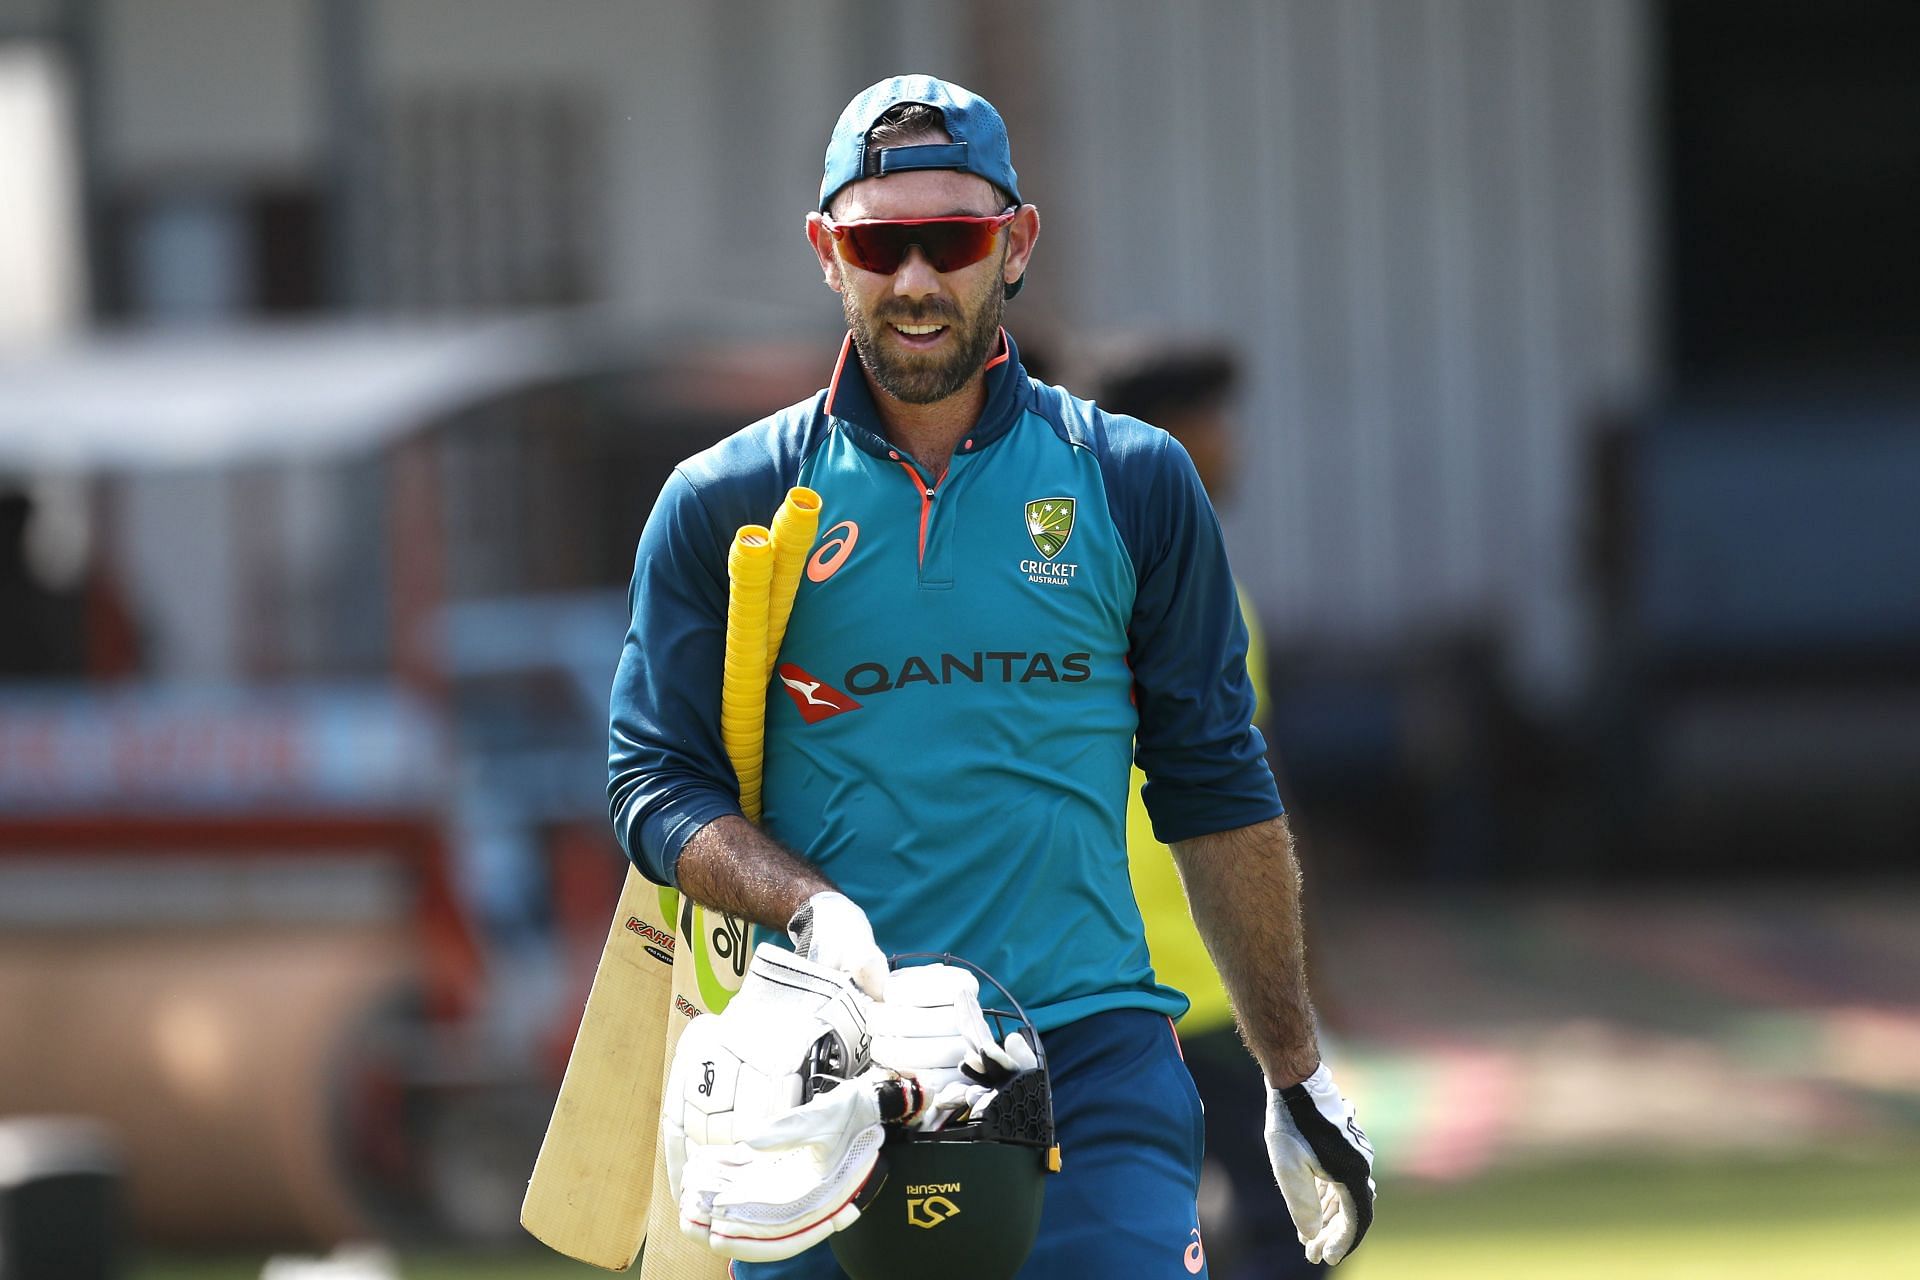 Glenn Maxwell will look to get into the runs when RCB take on LSG (File Image).